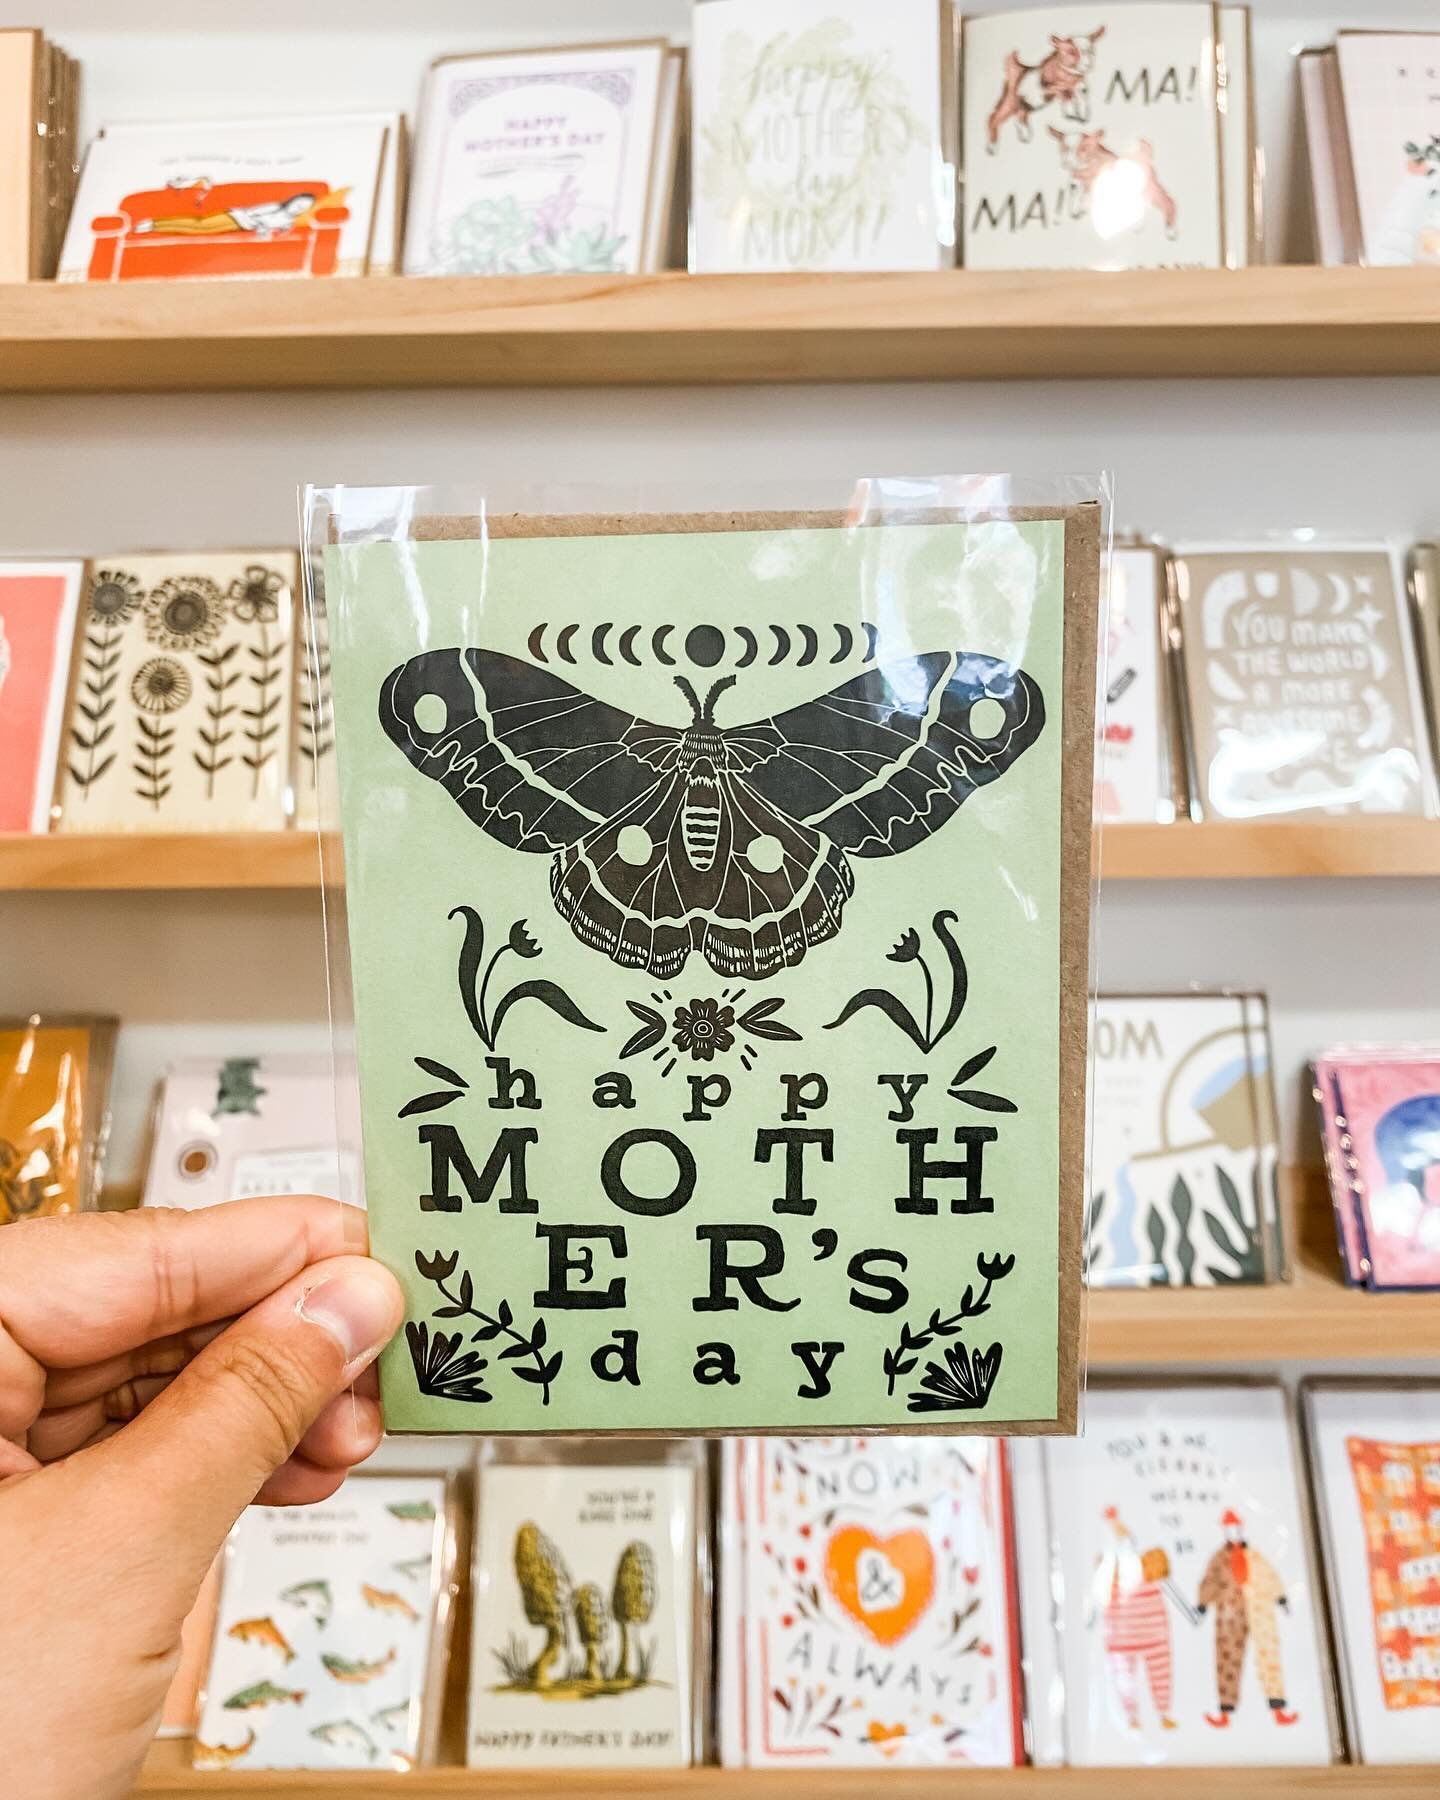 Happy Sunday! The sun is shining and we are open 12-4 with all kinds of cards for mom (and dad, if you&rsquo;re thinking ahead!) 😉

.

.

.

.

.

.

#LiveLoveMOV #MariettaOhio #MyMarietta #ArtShop #LocalArt #SupportArtists #Handmade #ShopSmall #Sho